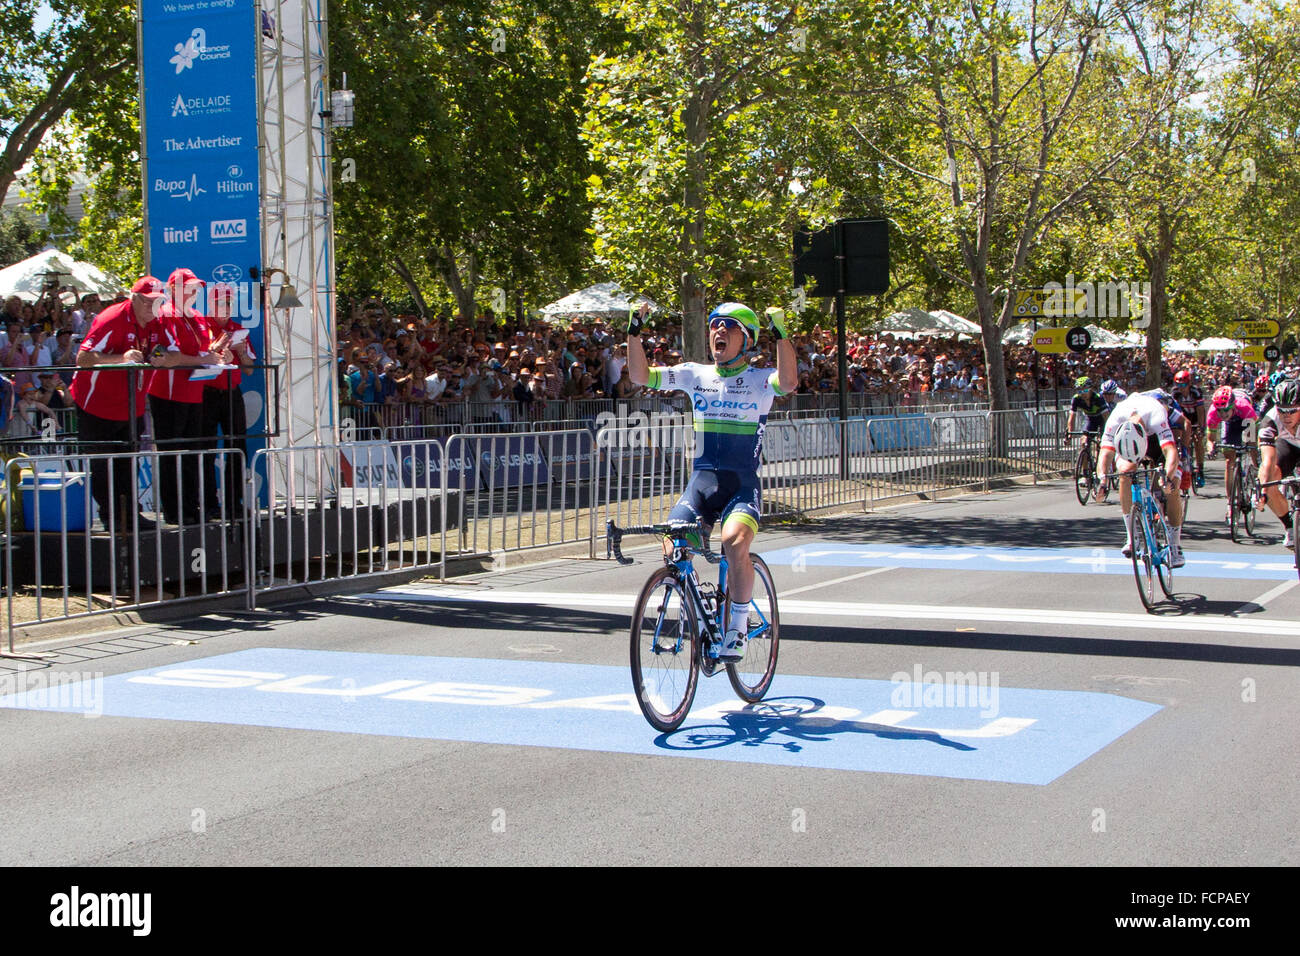 Caleb Ewan of the Orica Green Edge Team wins stage 6 of cycling's Tour Down Under in Adelaide. Simon Gerrans was the overall winner. Stock Photo